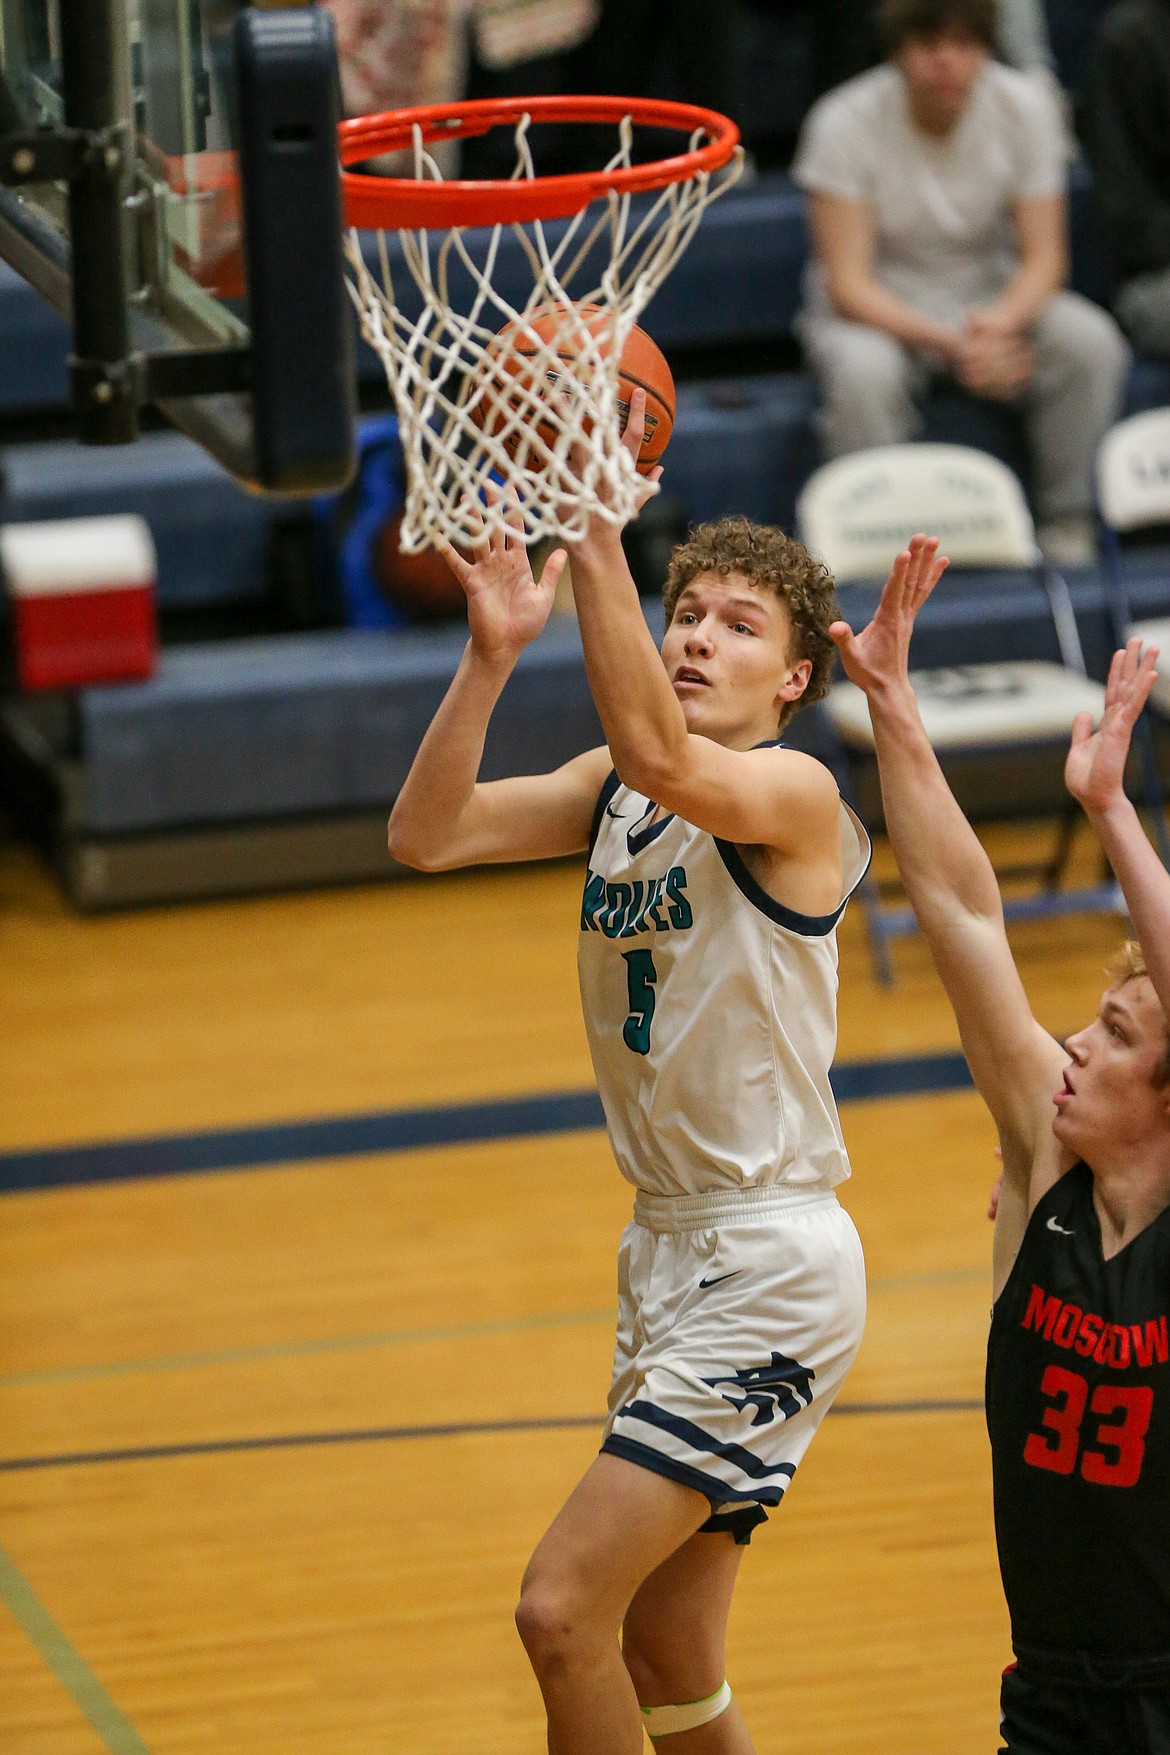 JASON DUCHOW PHOTOGRAPHY
Deacon Kiesbuy (5) of Lake City goes up for a shot as Zac Skinner (33) of Moscow defends on Tuesday night at Lake City.